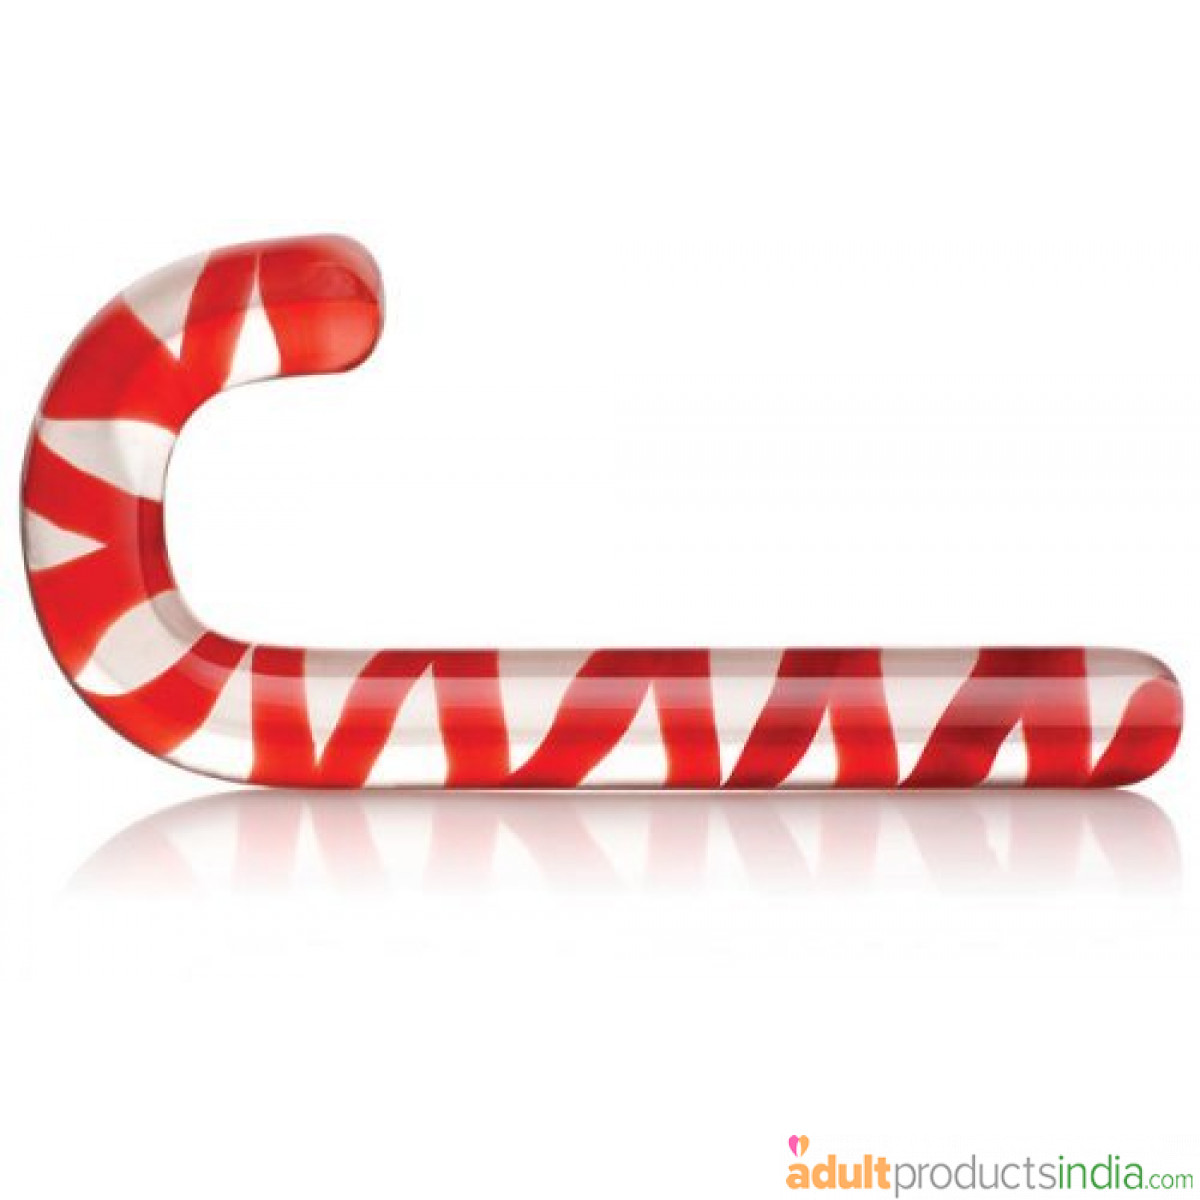 Red Candy Cane Glass Pleasure Wand Dildo